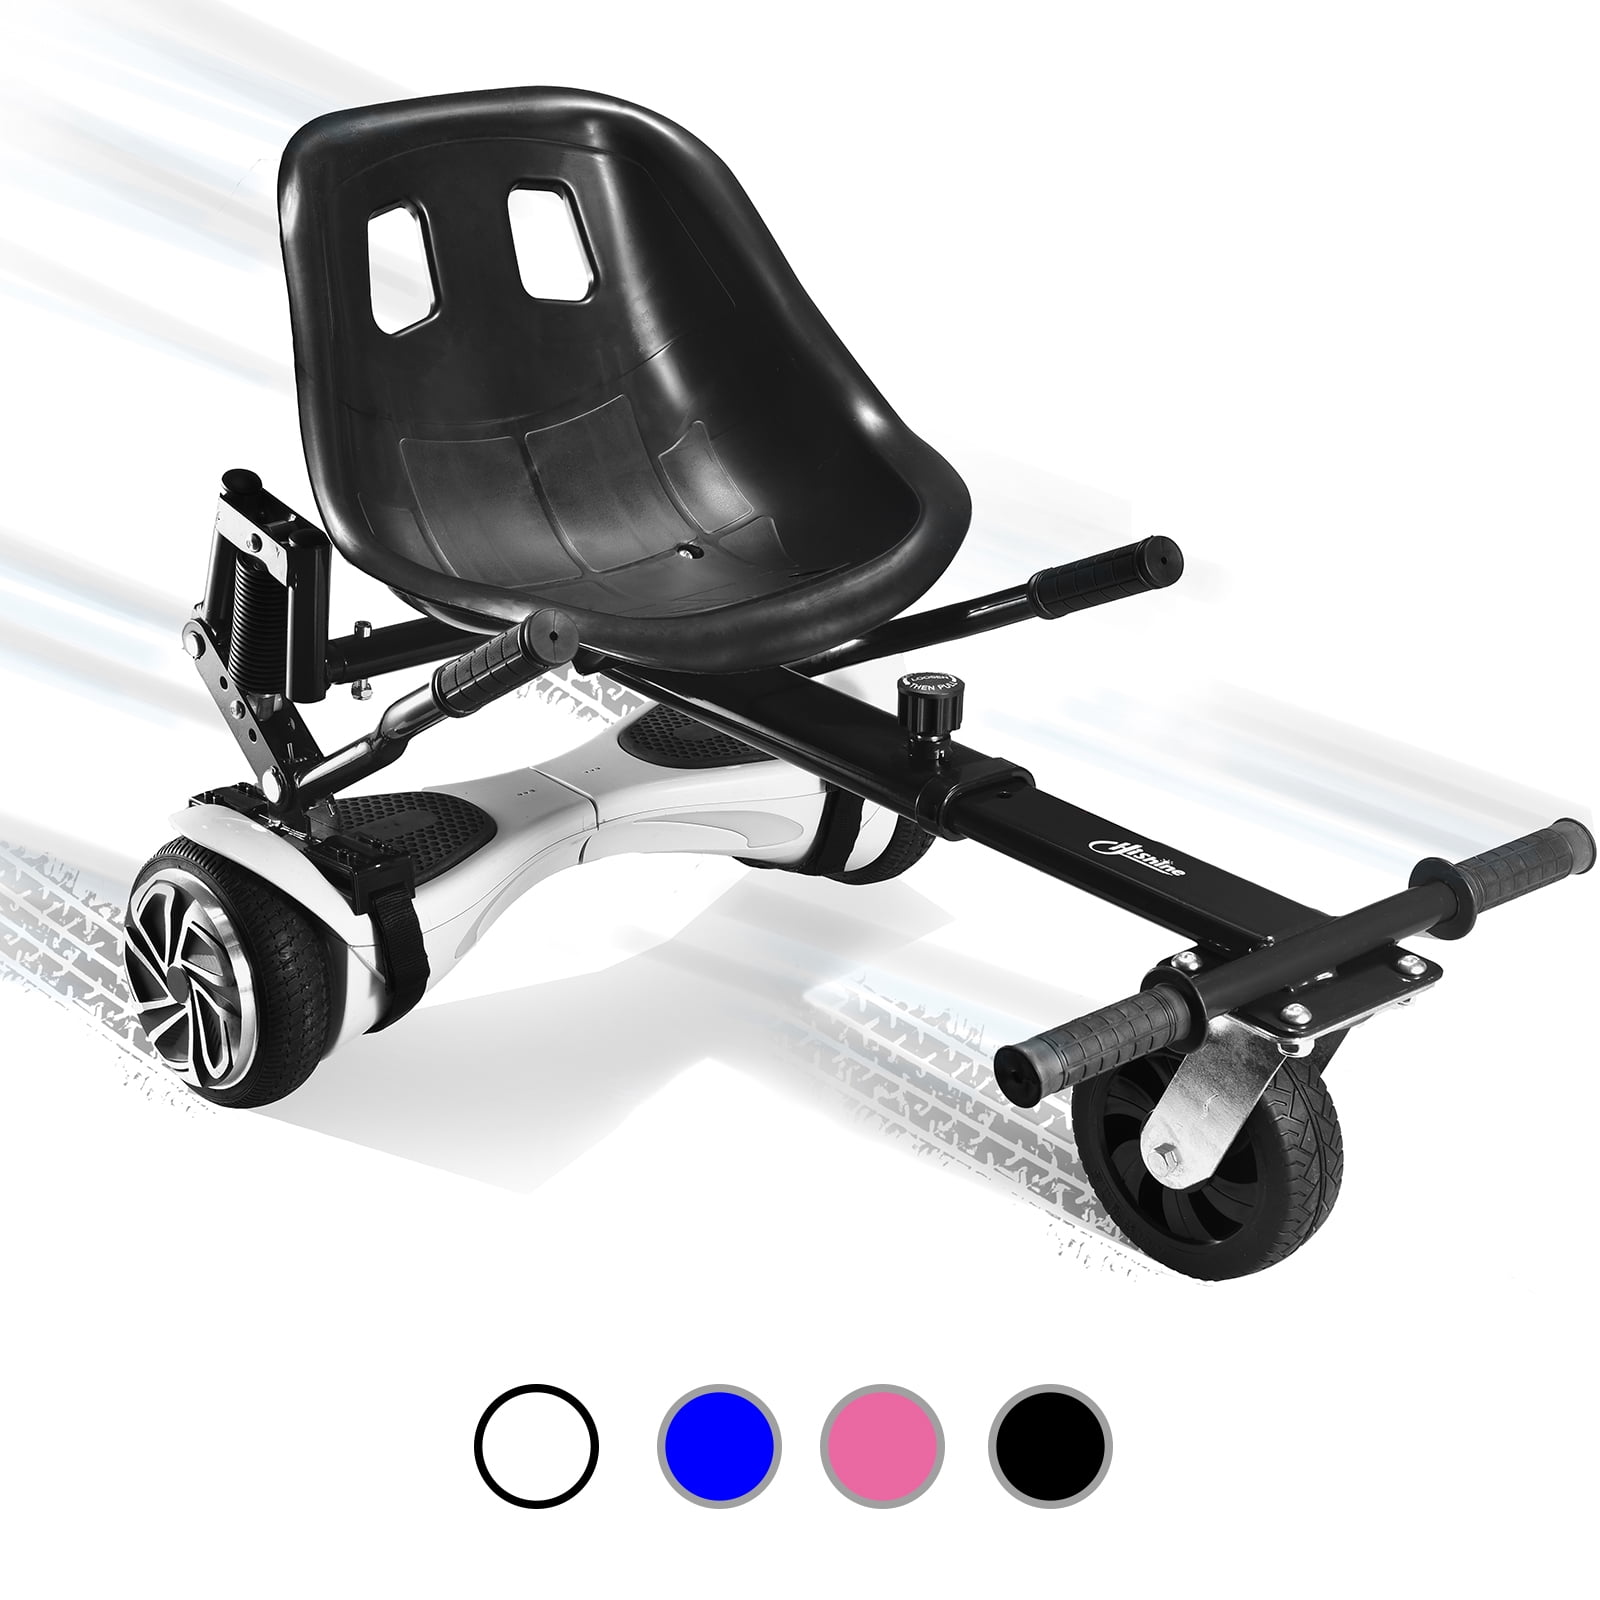 Balancing Scooter Holder Stand Go Kart Seat w/ Strap